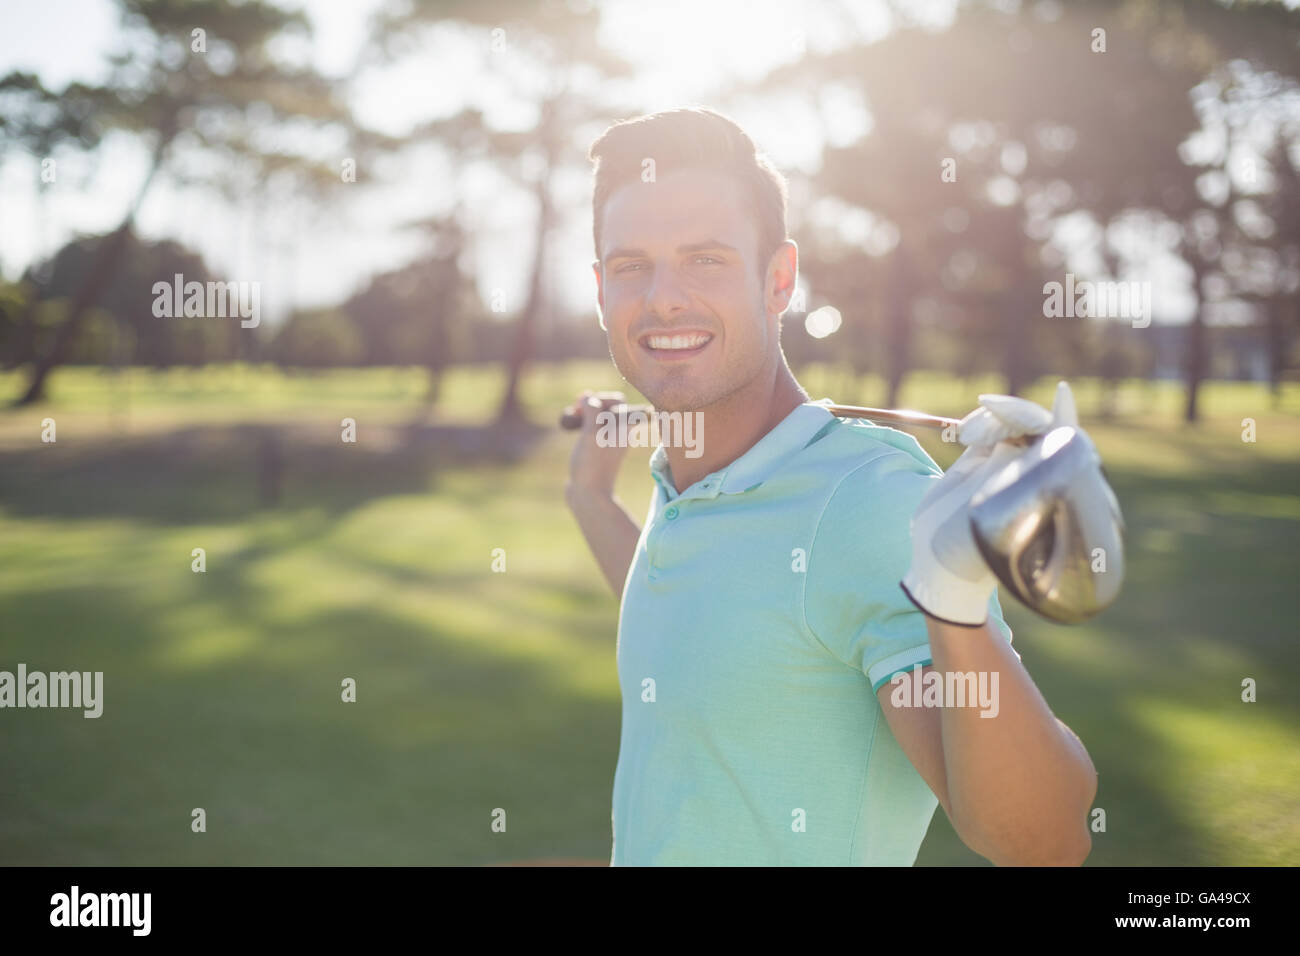 Portrait of happy young man carrying golf club Banque D'Images